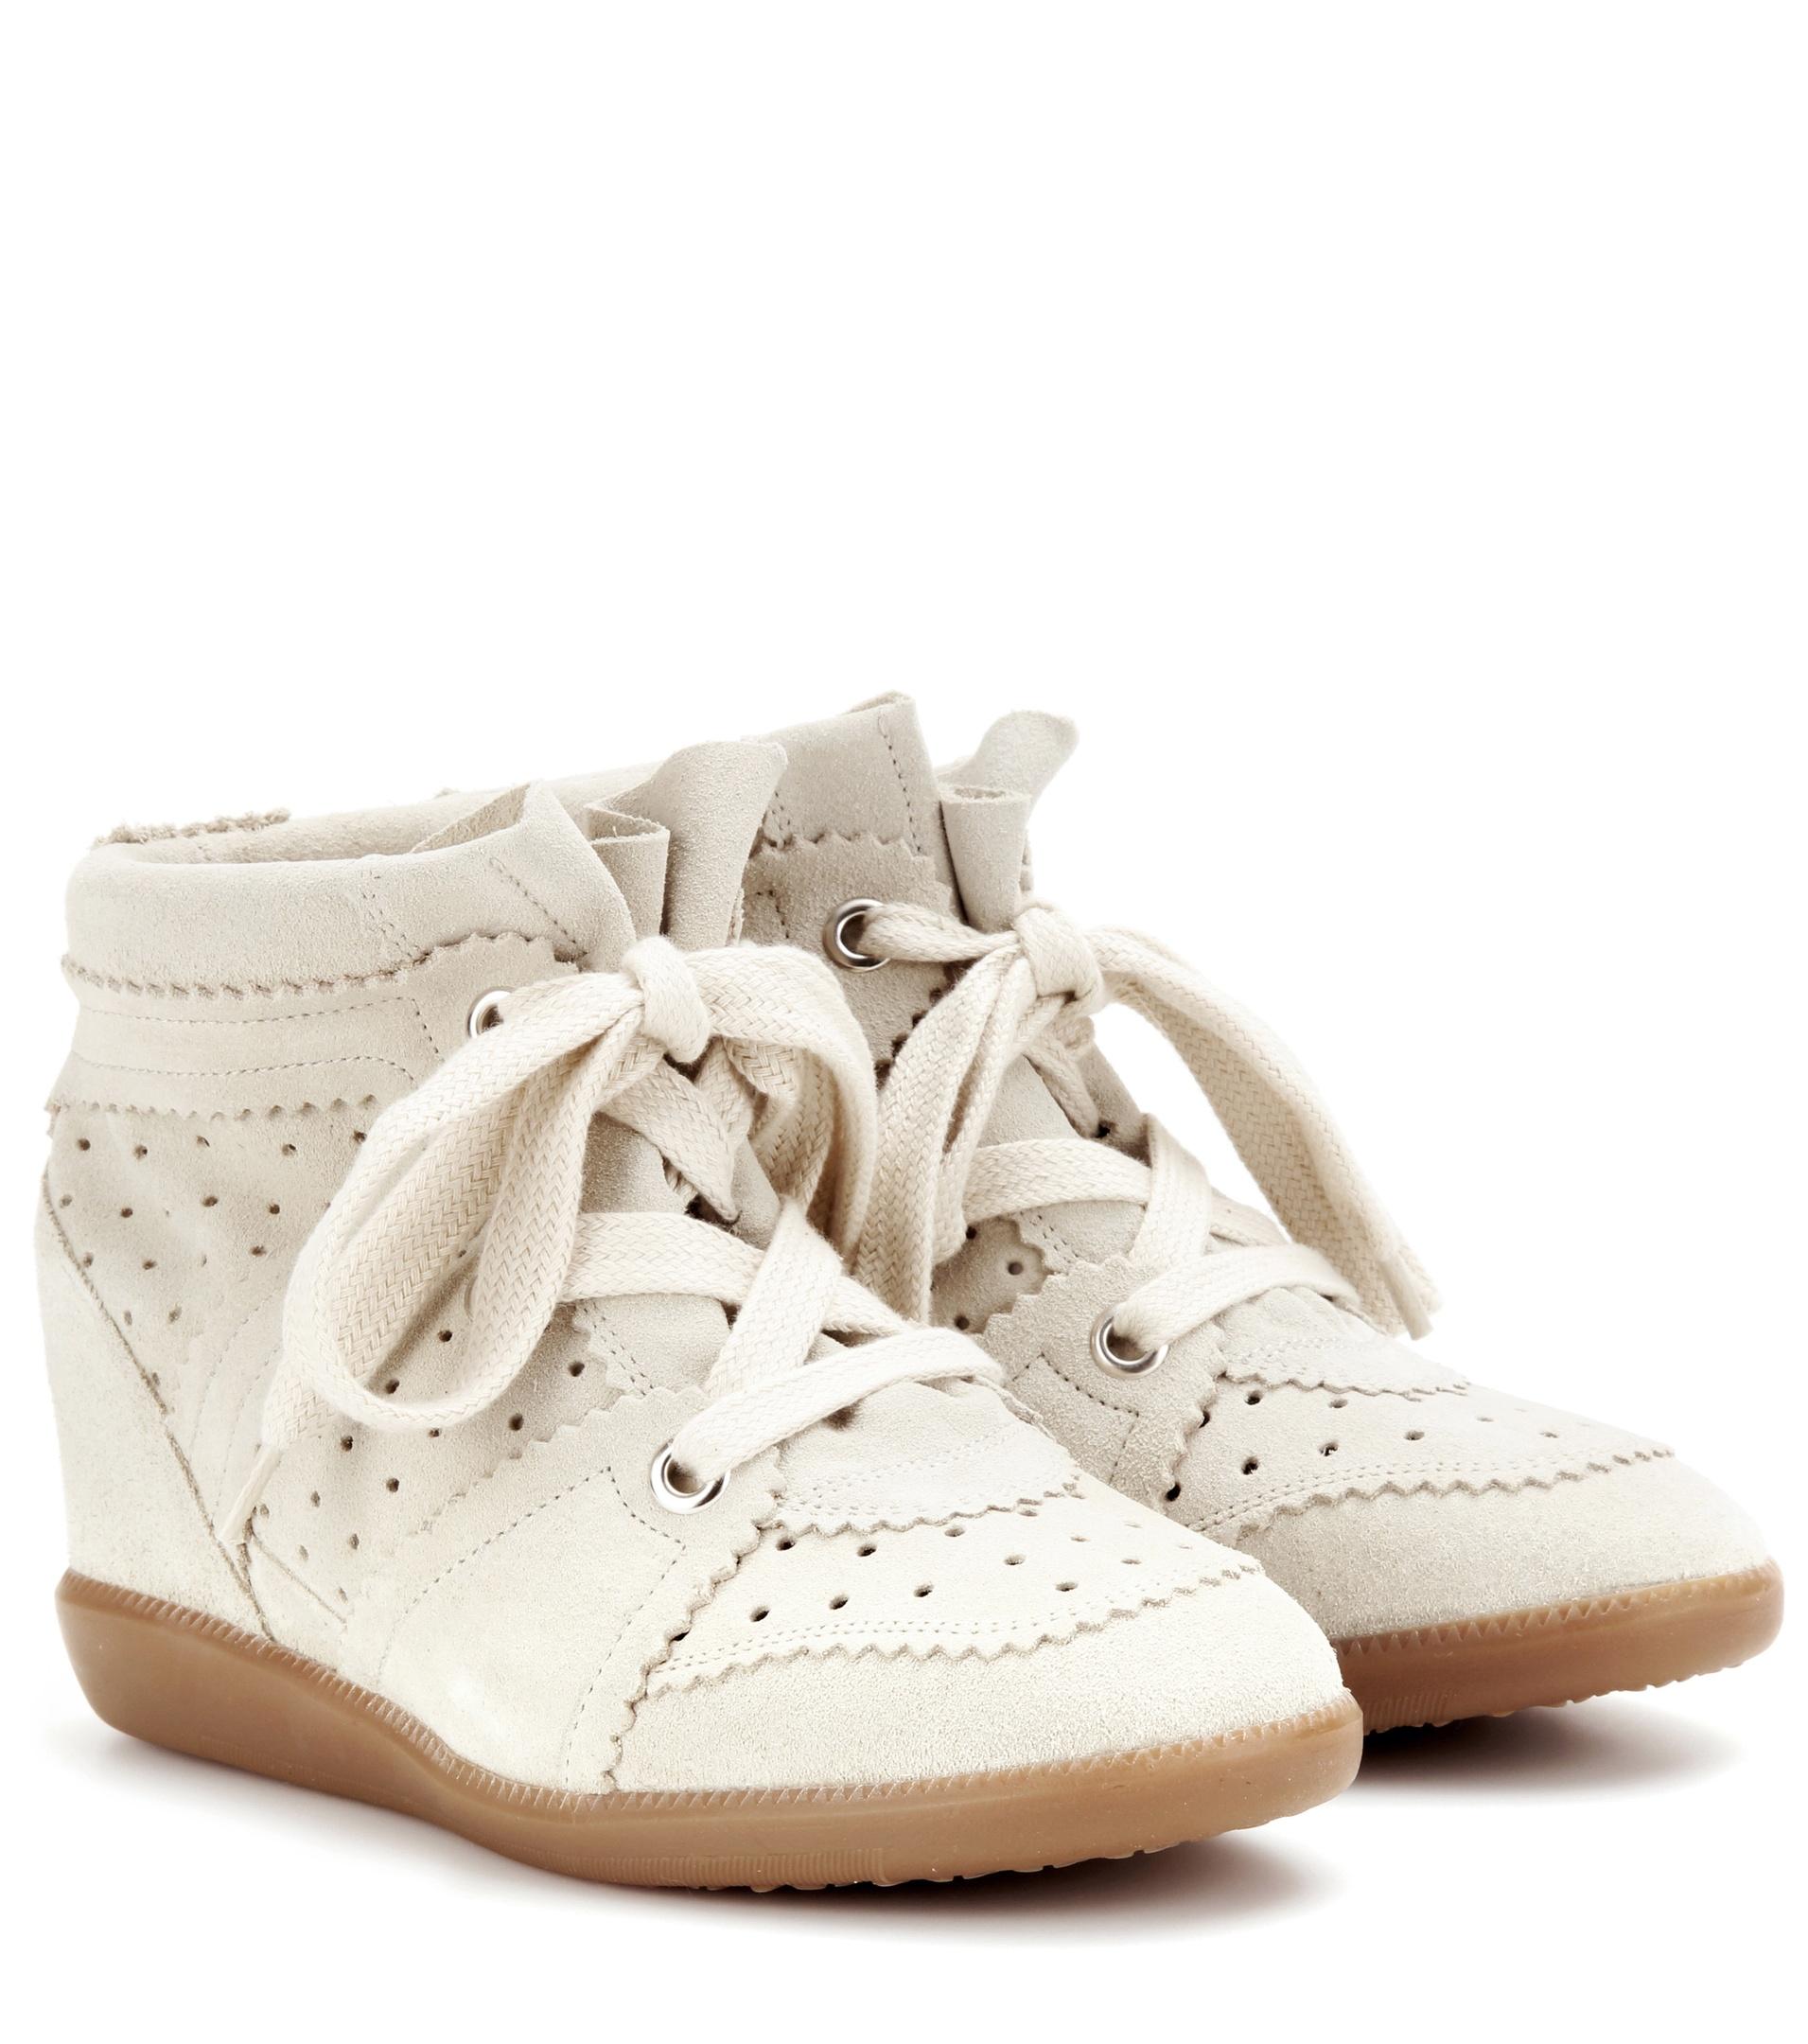 Isabel marant Toile Bobby Suede Wedge Sneakers in Multicolor | Lyst